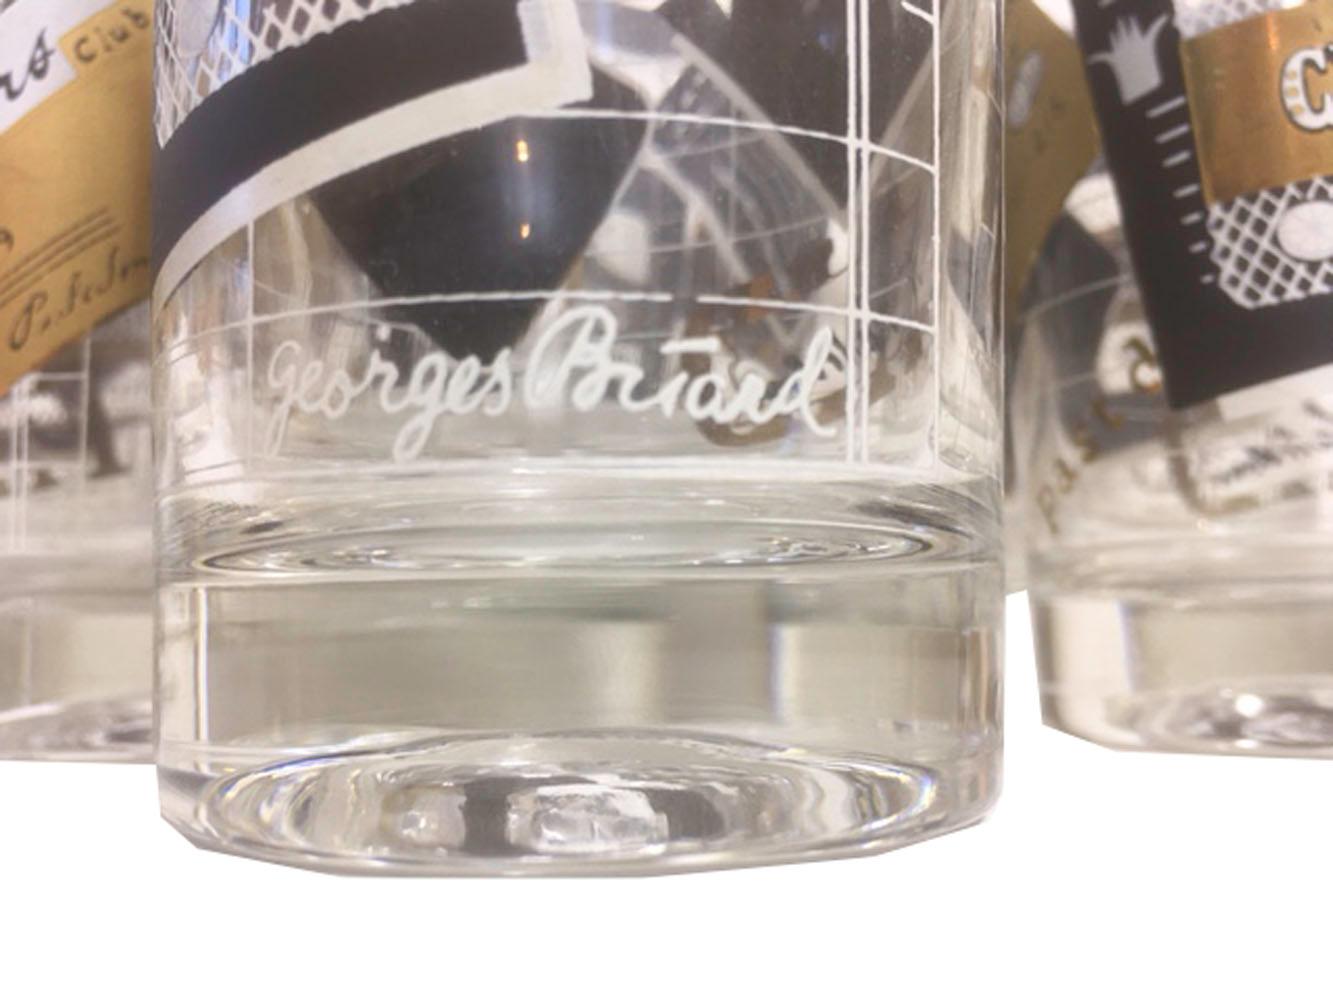 Eight Georges Briard, Drink Now, Pay Later, Credit Card Themed Highball Glasses In Good Condition For Sale In Nantucket, MA